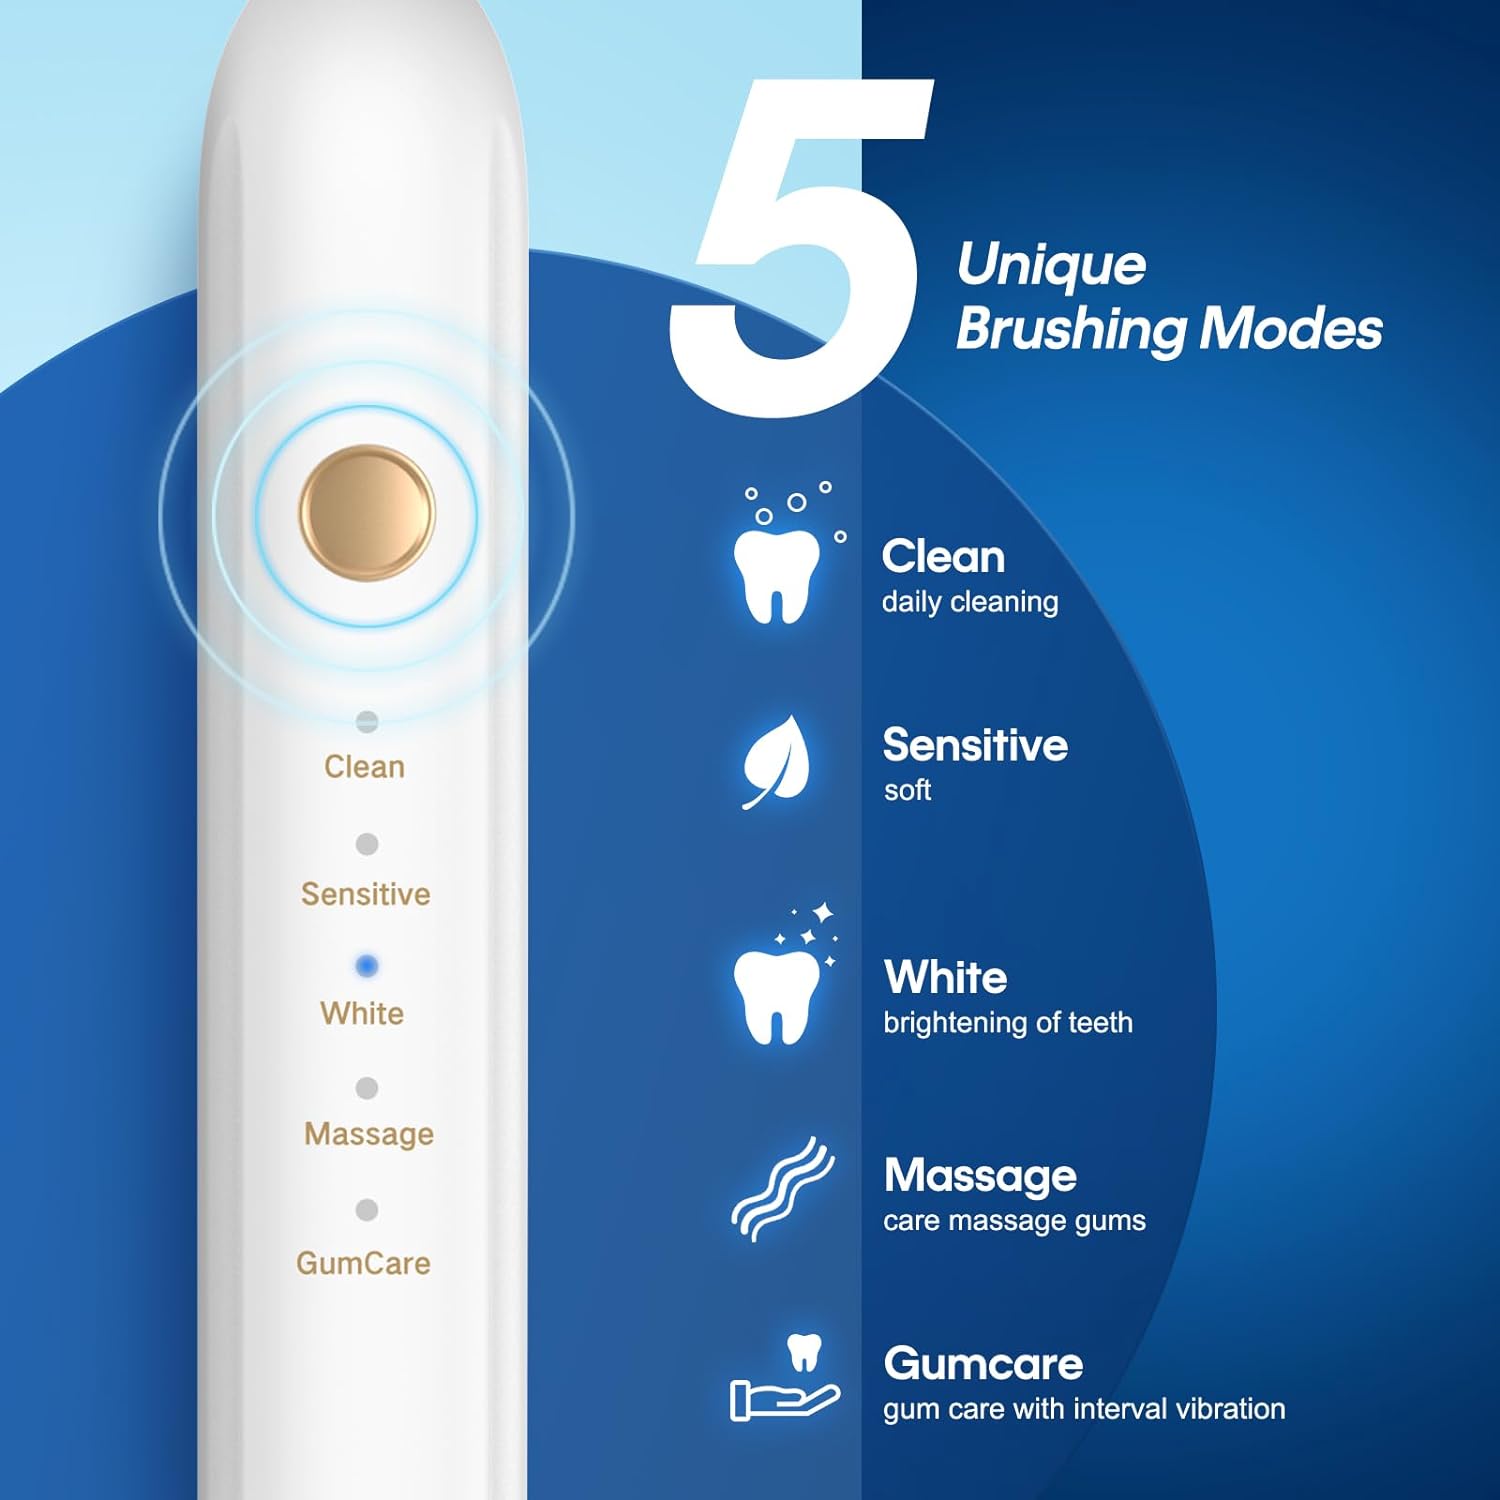 Sonic Electric Toothbrush Ultra Whitening Toothbrush Set, Professional Oral Care Sonic Toothbrush with 8 Brush Heads & Travel Case, Rechargeable & One Charge for 200 Days - 5 Modes Smart Timer